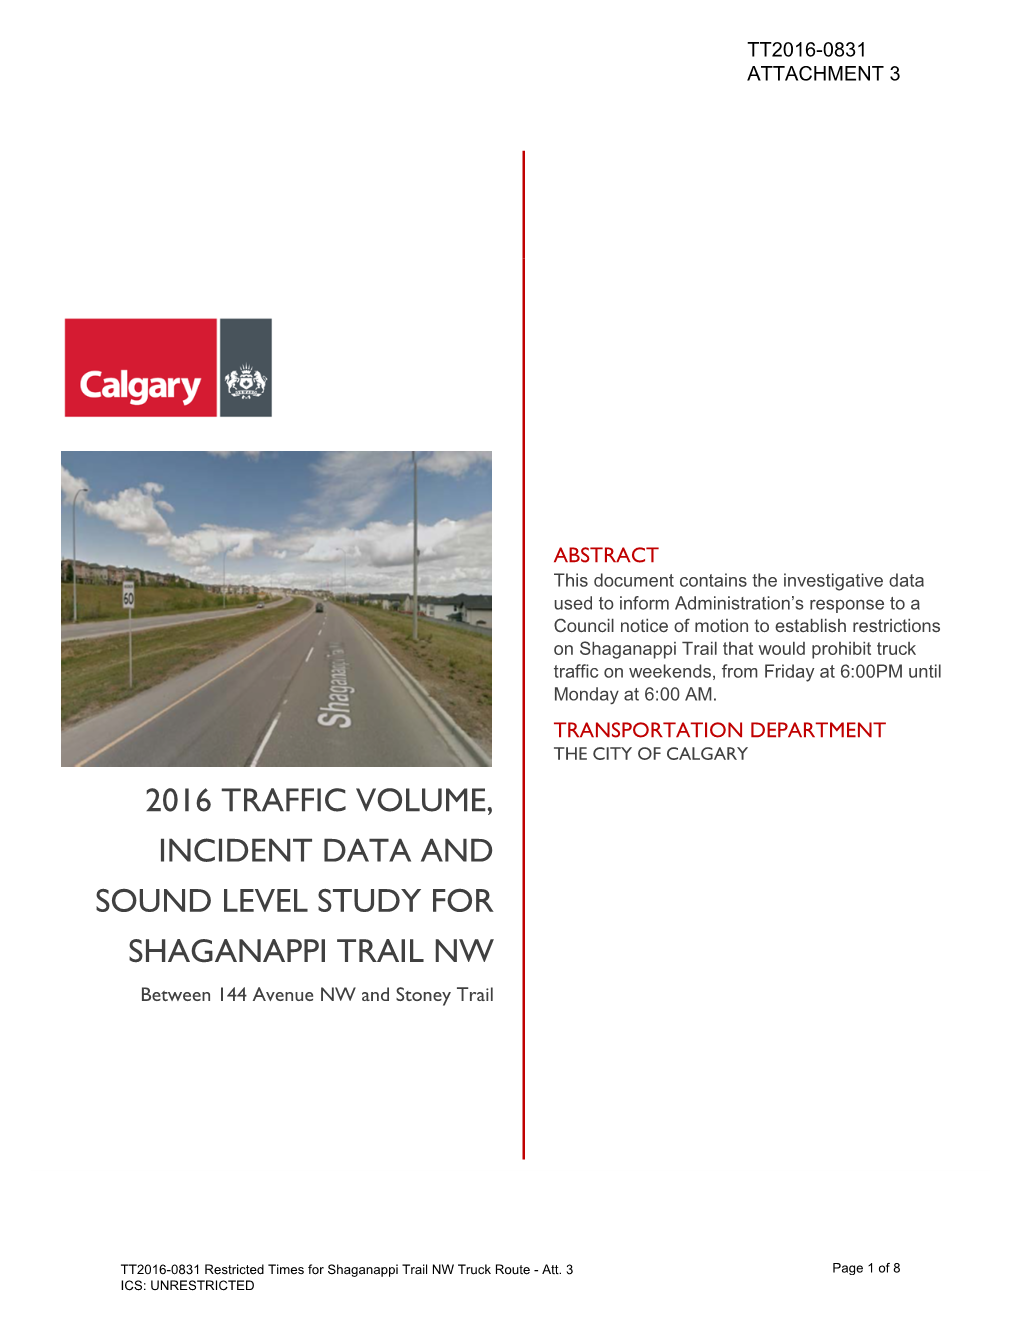 2016 TRAFFIC VOLUME, INCIDENT DATA and SOUND LEVEL STUDY for SHAGANAPPI TRAIL NW Between 144 Avenue NW and Stoney Trail